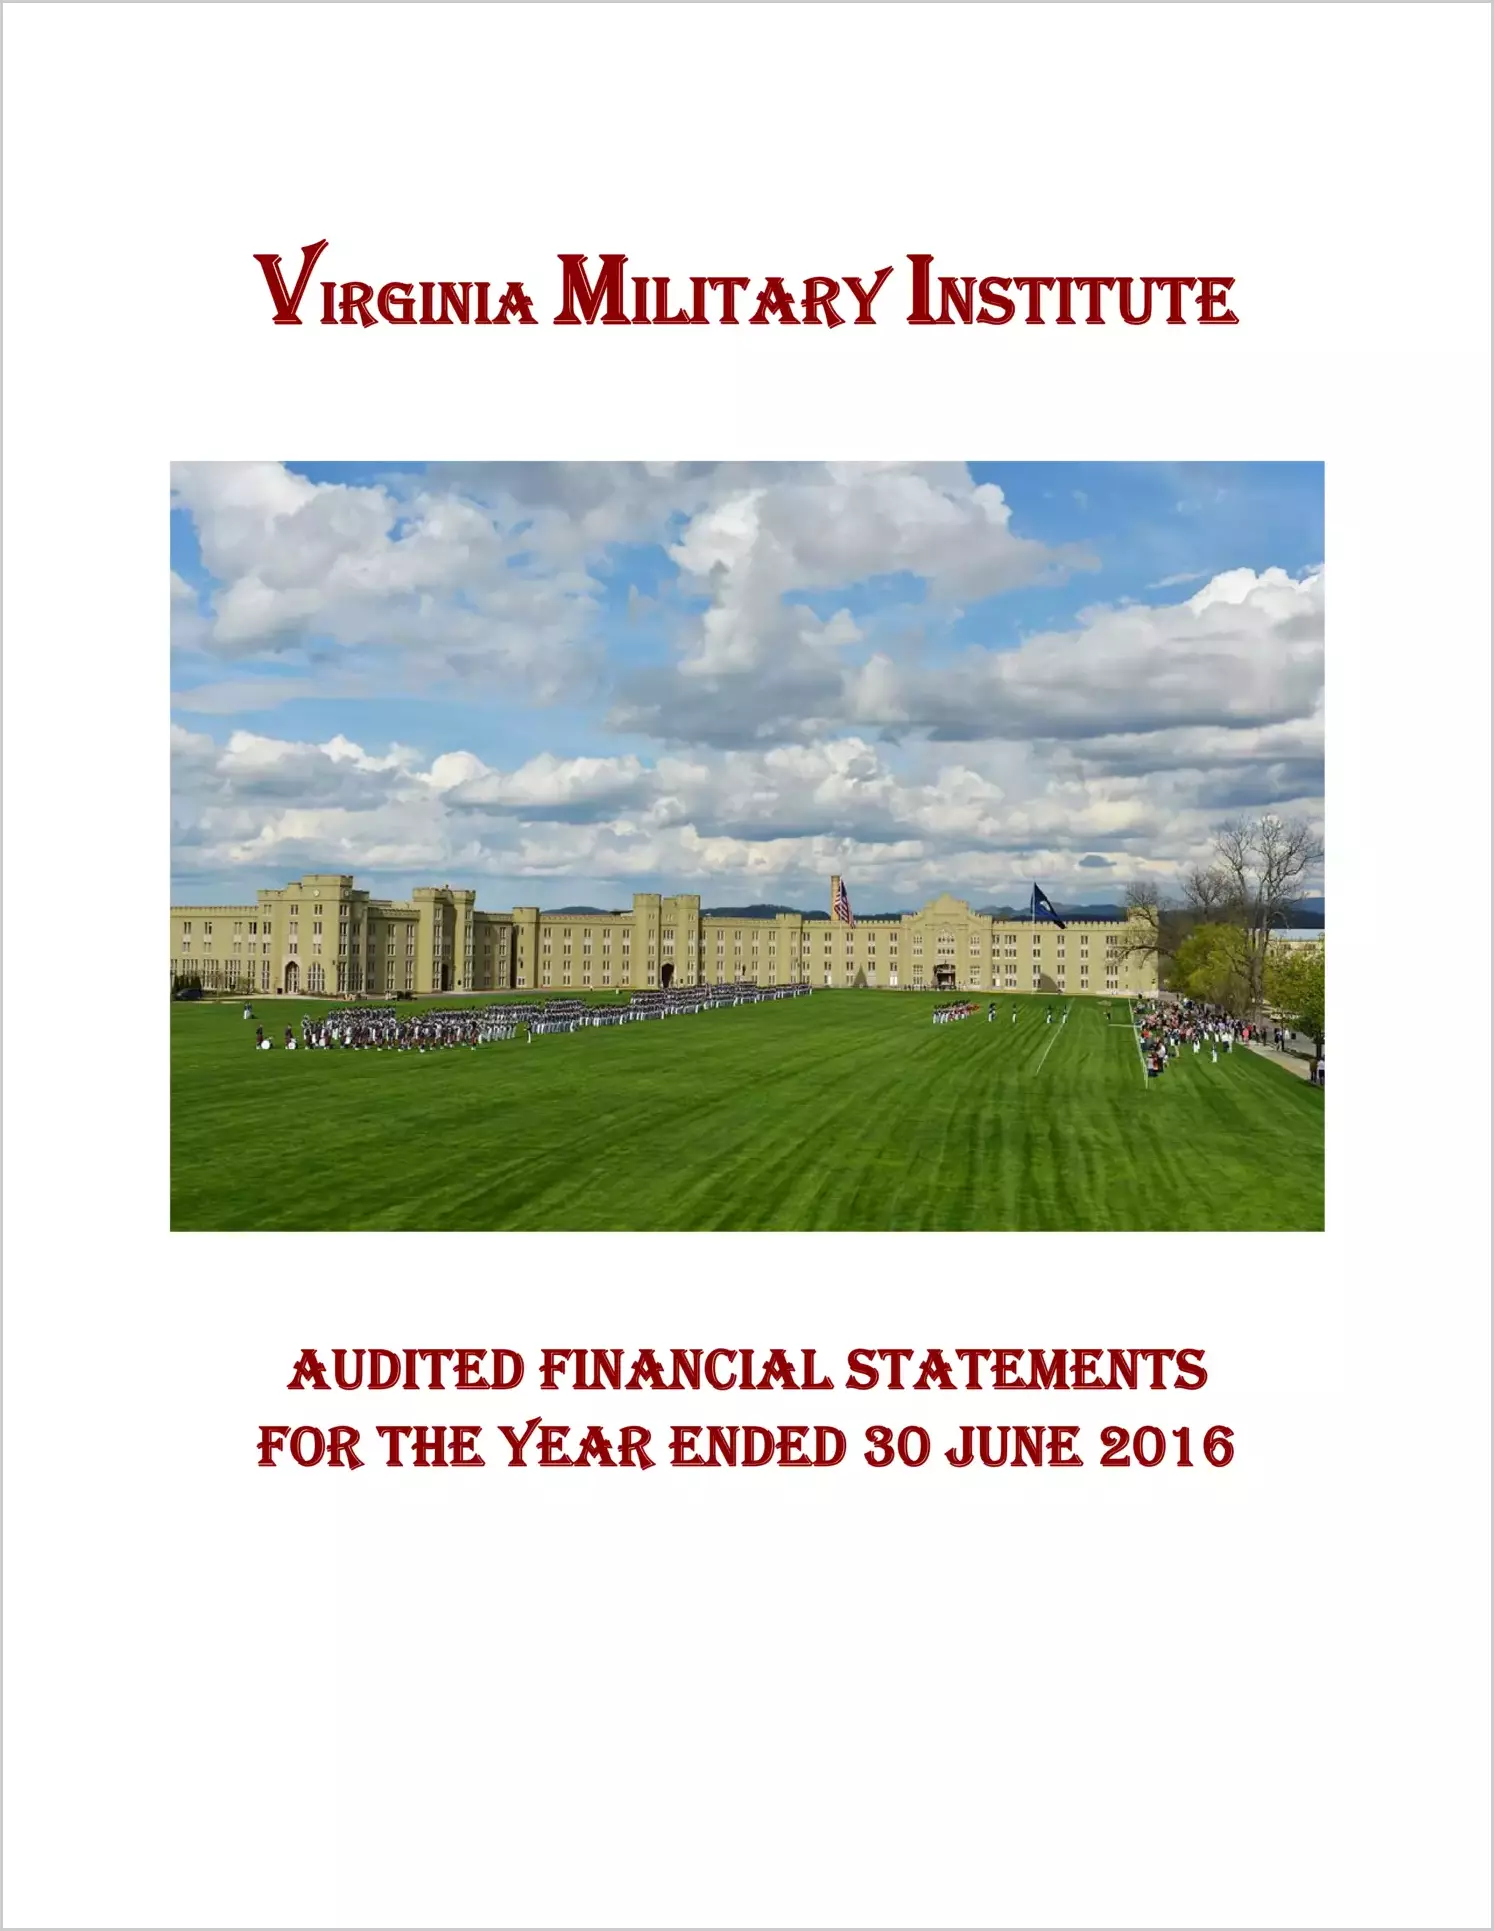 Virginia Military Institute Financial Statements for the year ended June 30, 2016